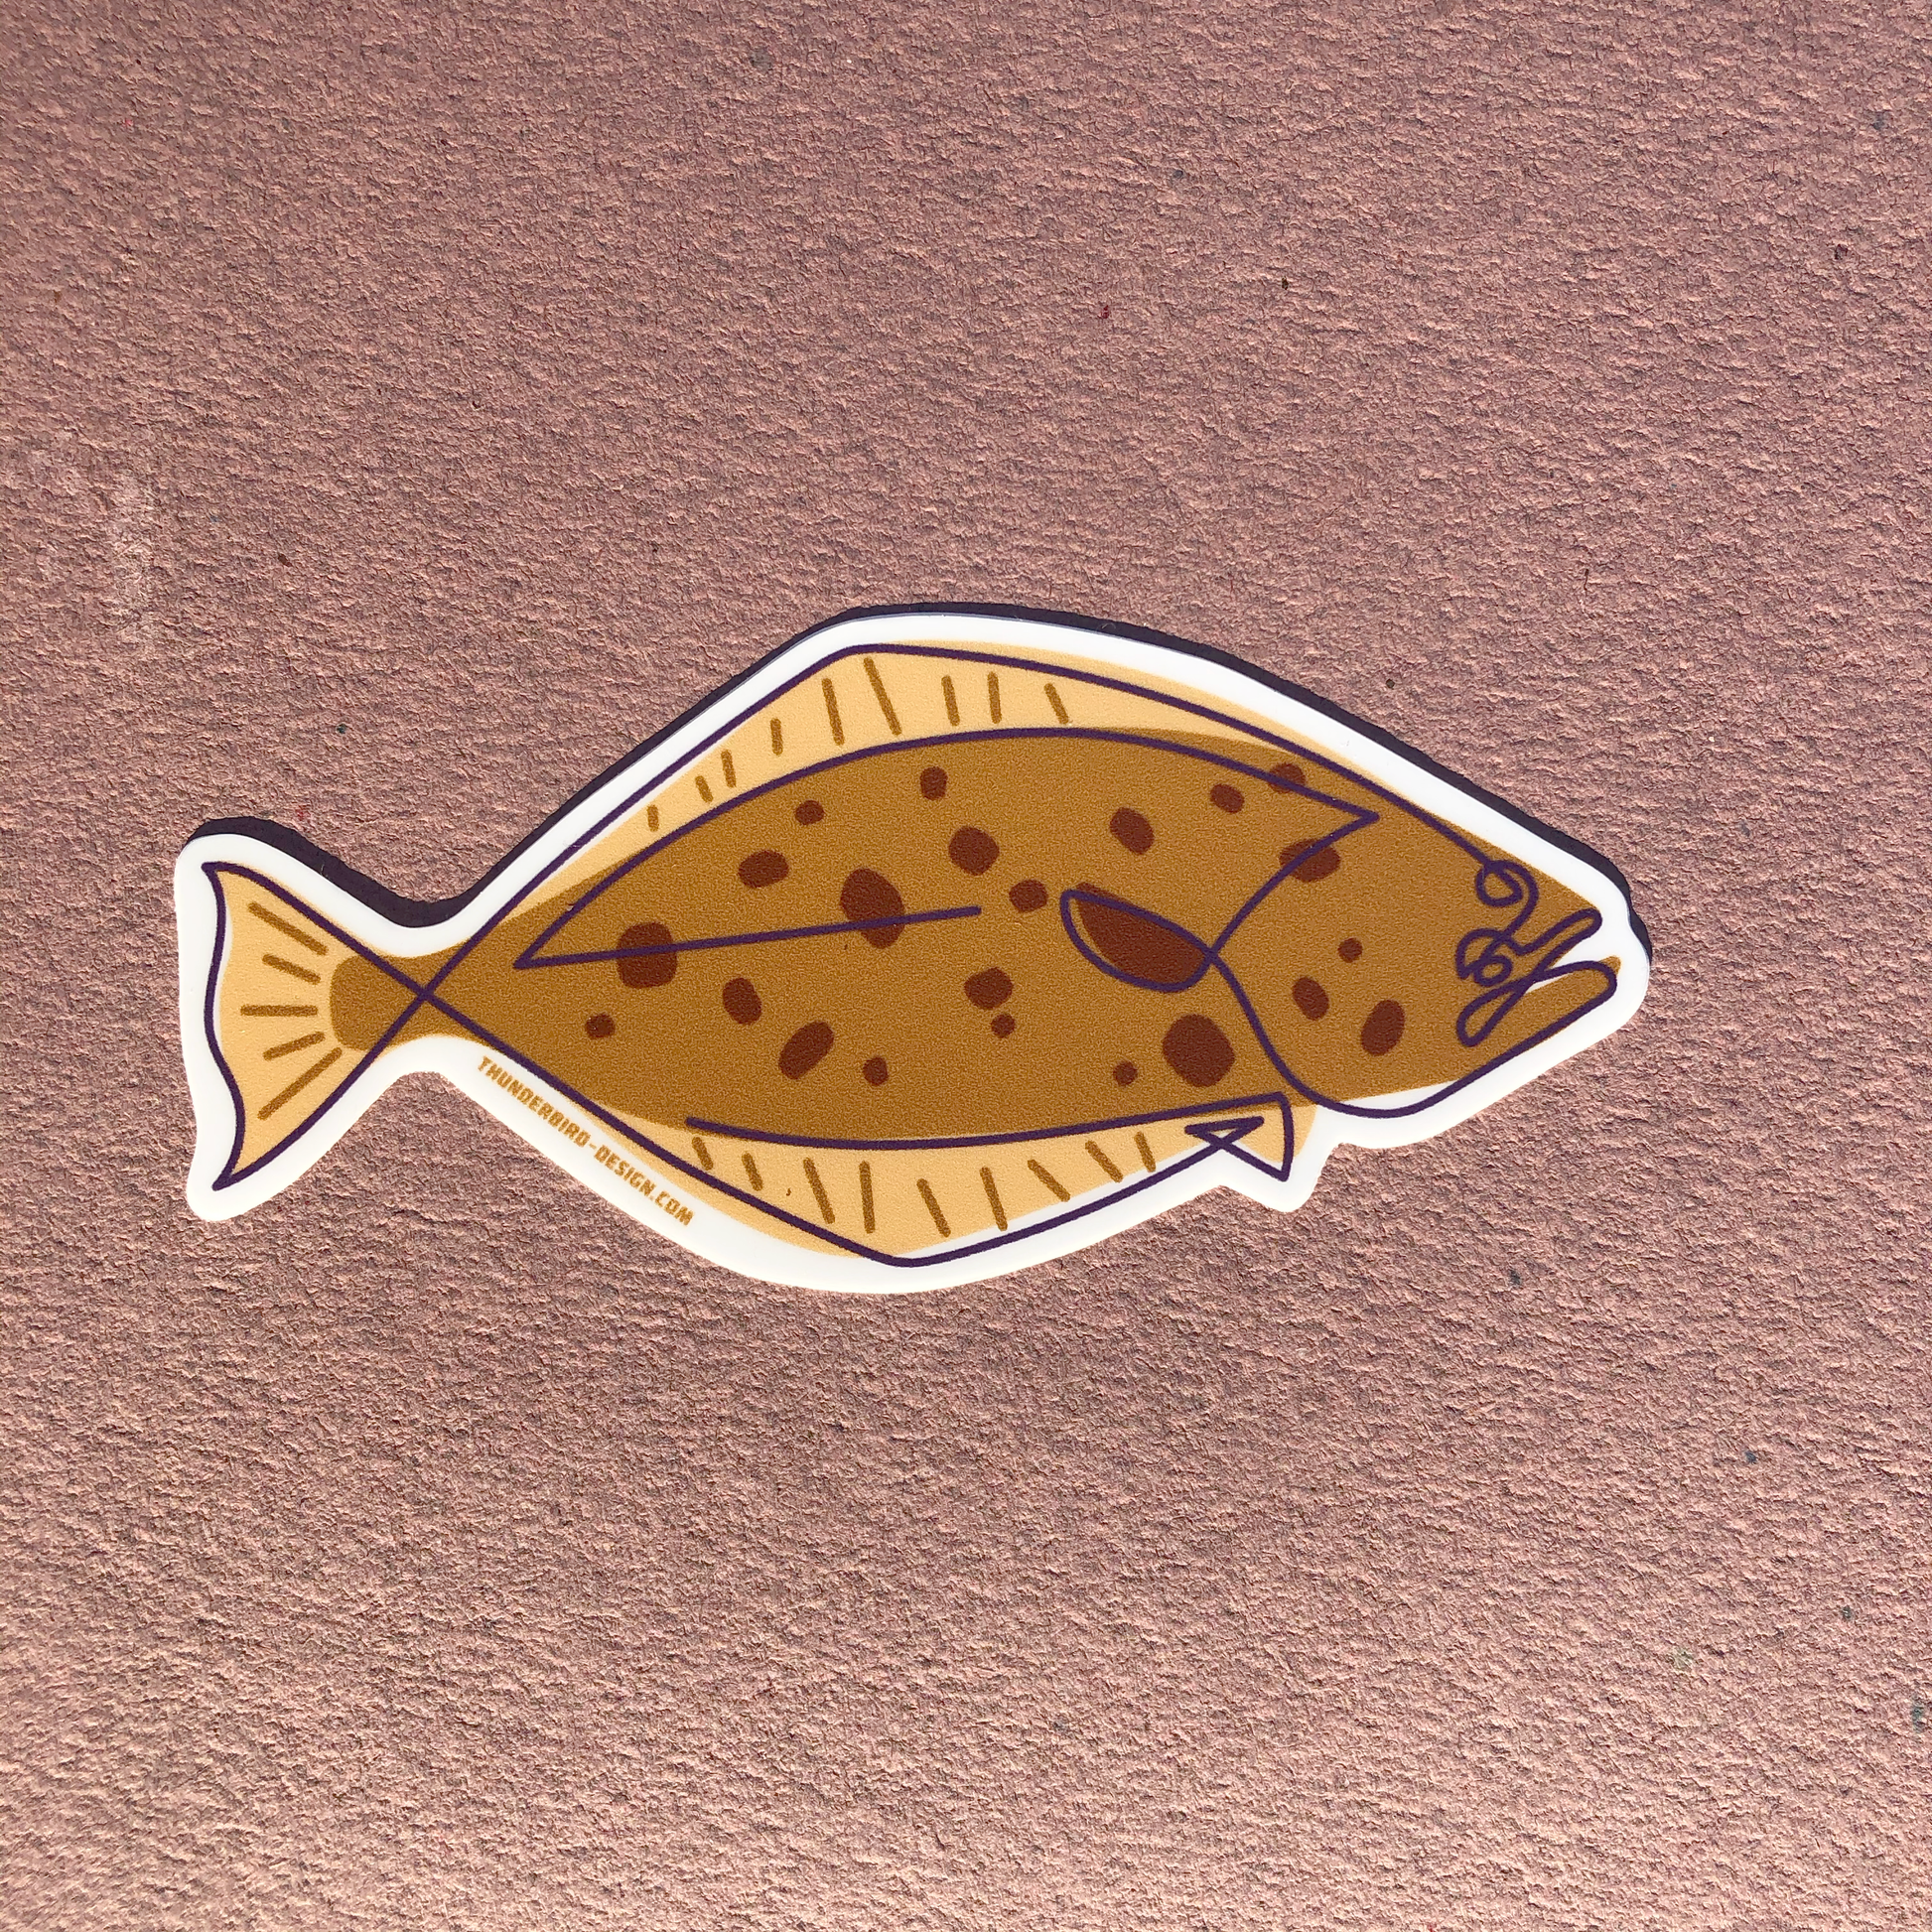 Thunderbird Outdoor SupplyHalibut Single Line - Matte DecalHalibut Single Line - Matte Decal
4" Drawn, Single Line Halibut Illustration.These weatherproof Matte decals are perfect for your Rod tube, water bottle, tackle box, car window or whatever else you 